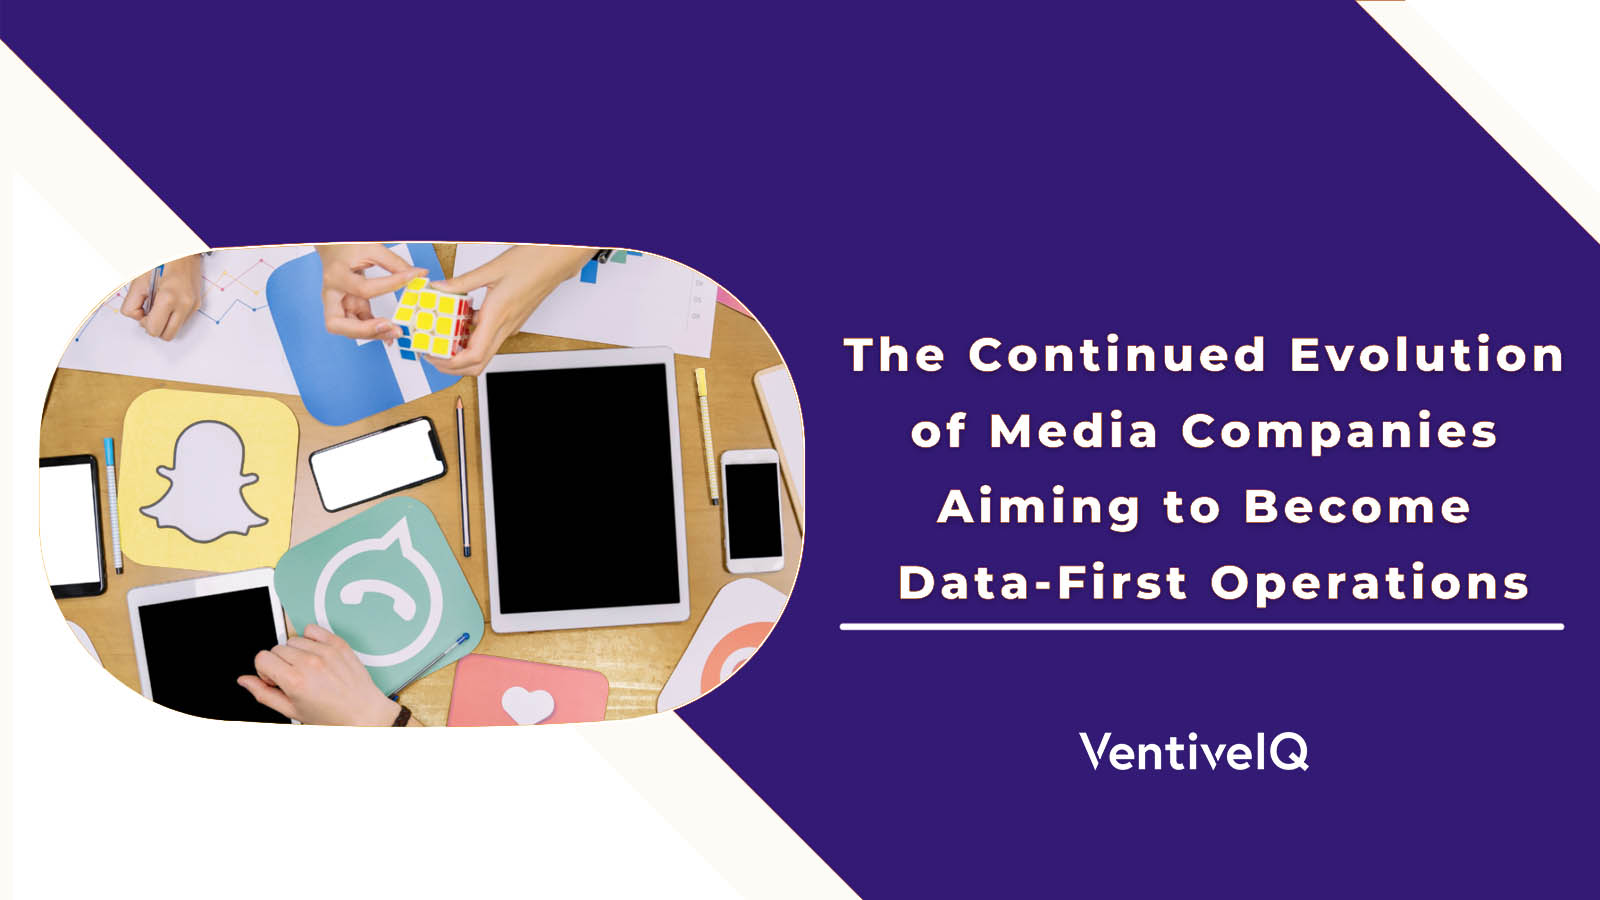 The Continued Evolution of Media Companies Aiming to Become Data-First Operations